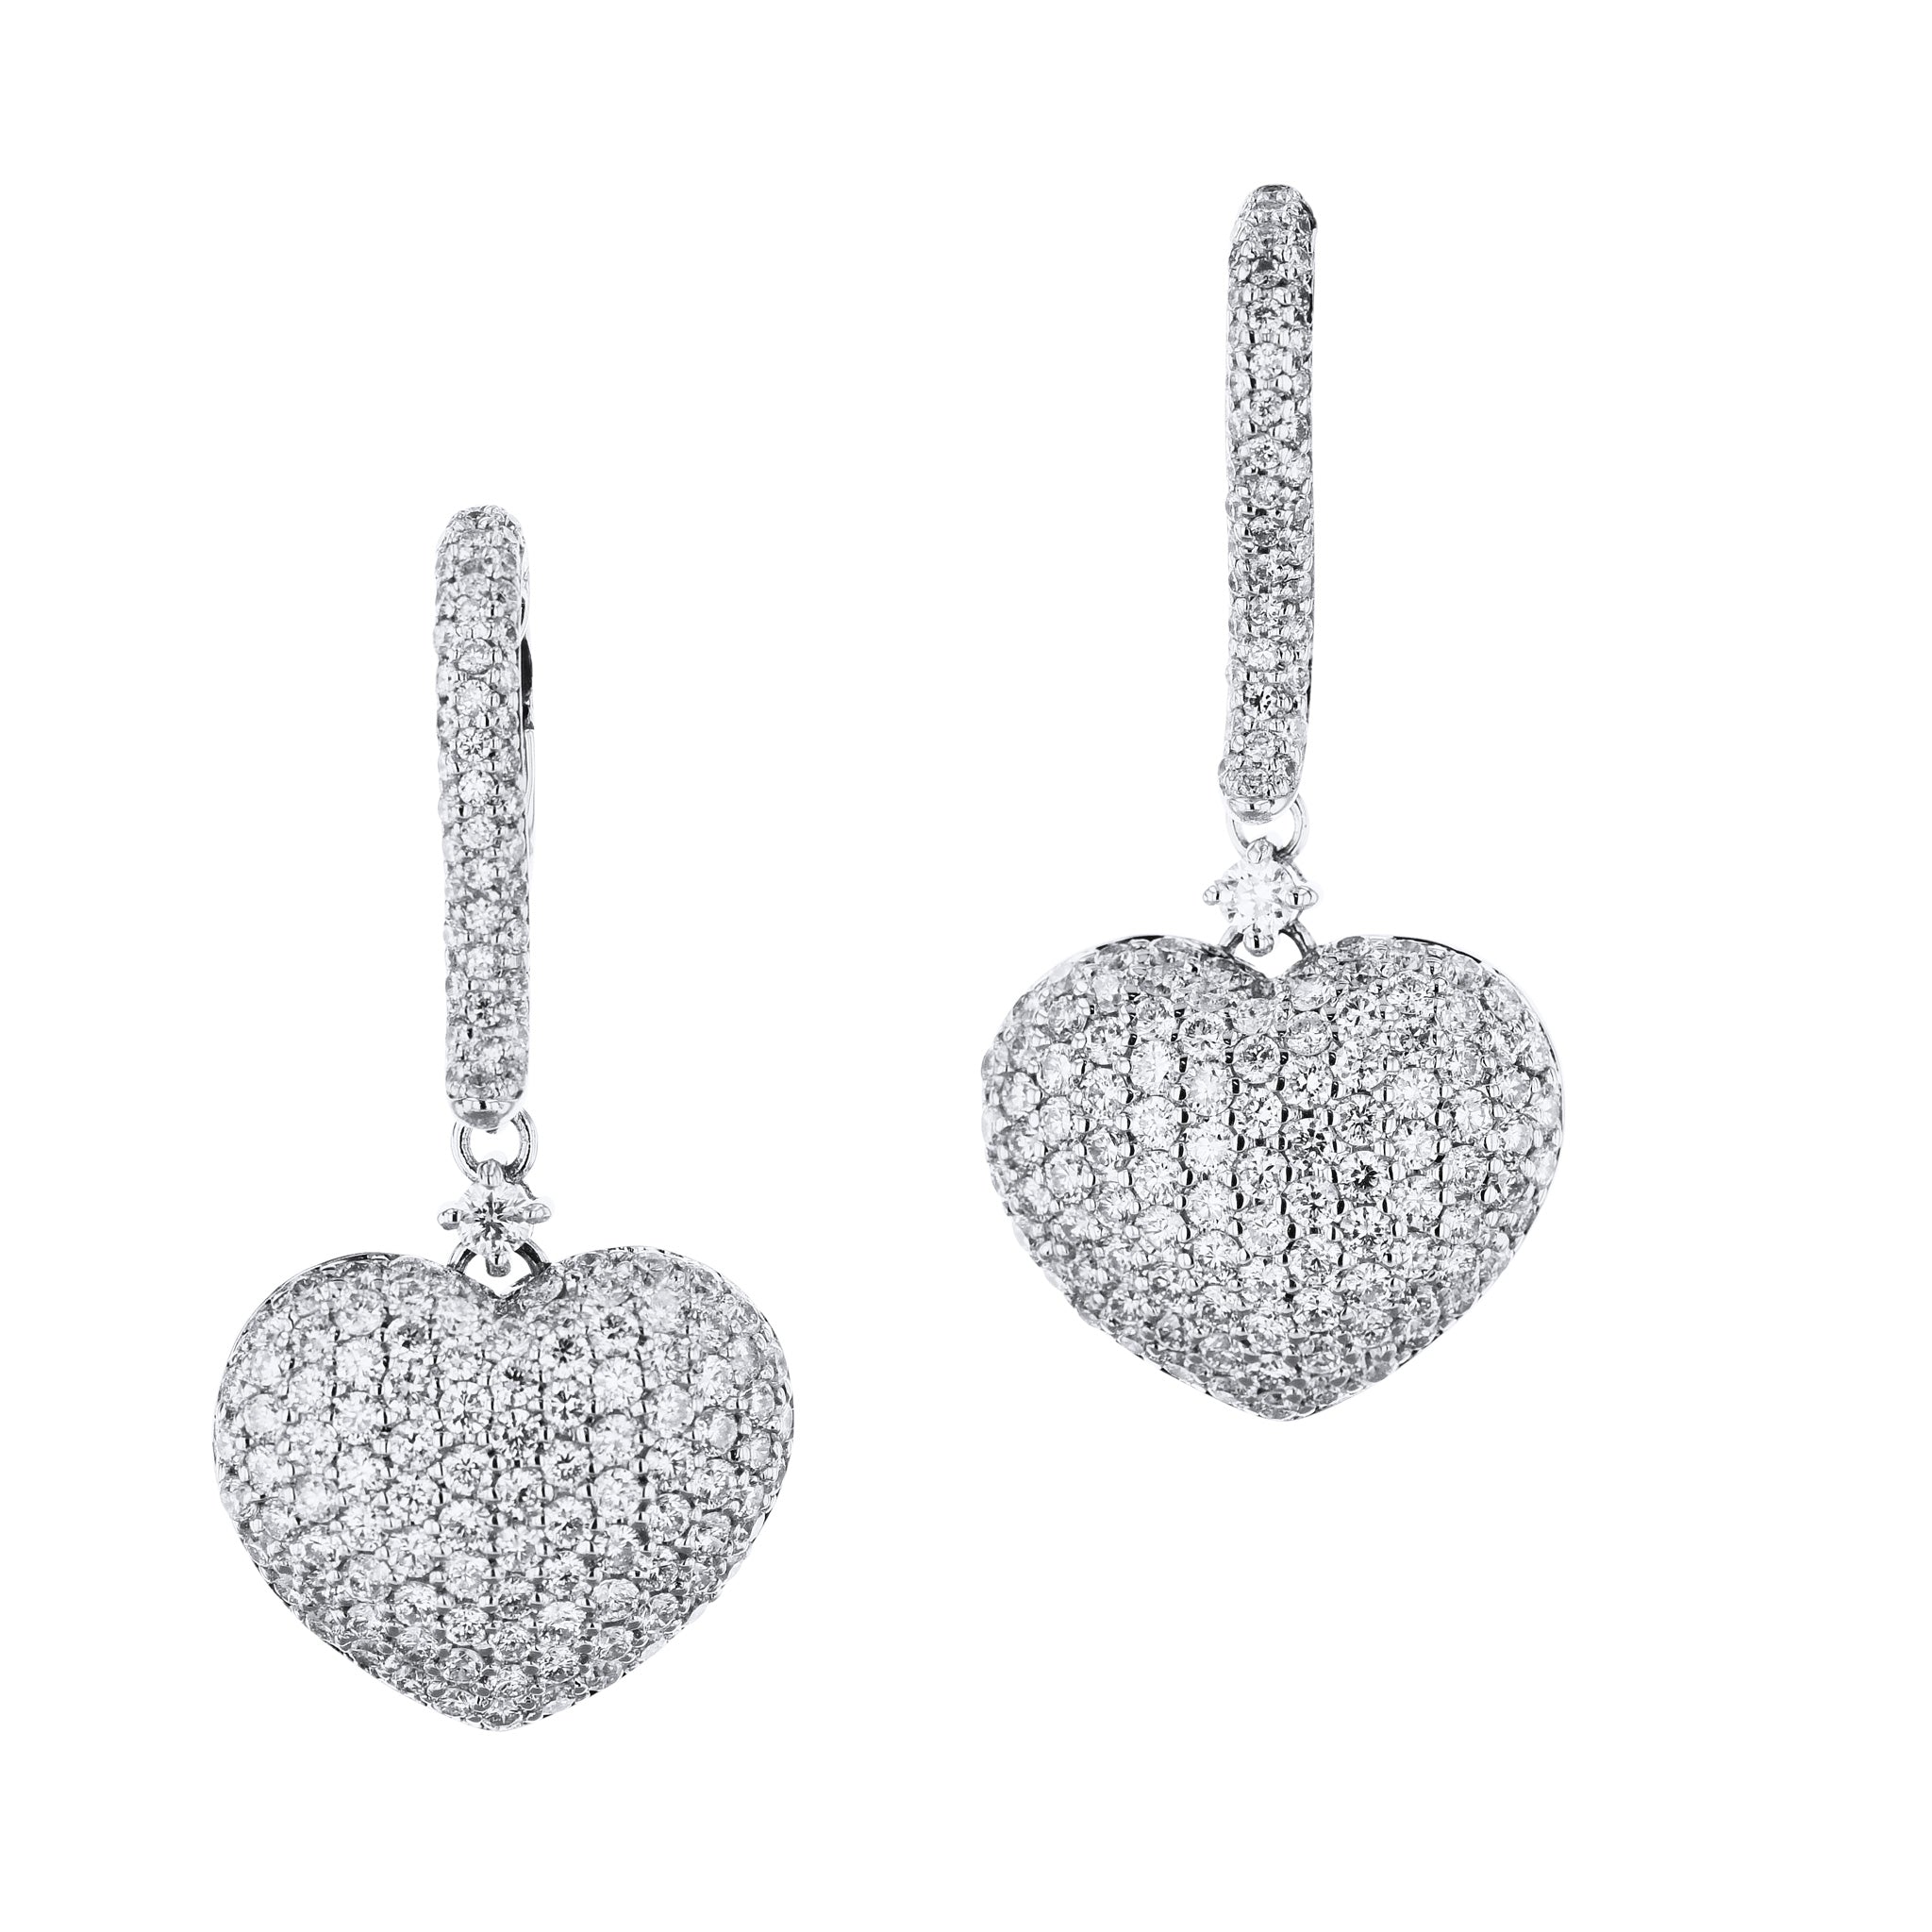 White Gold Heart Diamond Pave Drop Earrings Earrings Curated by H